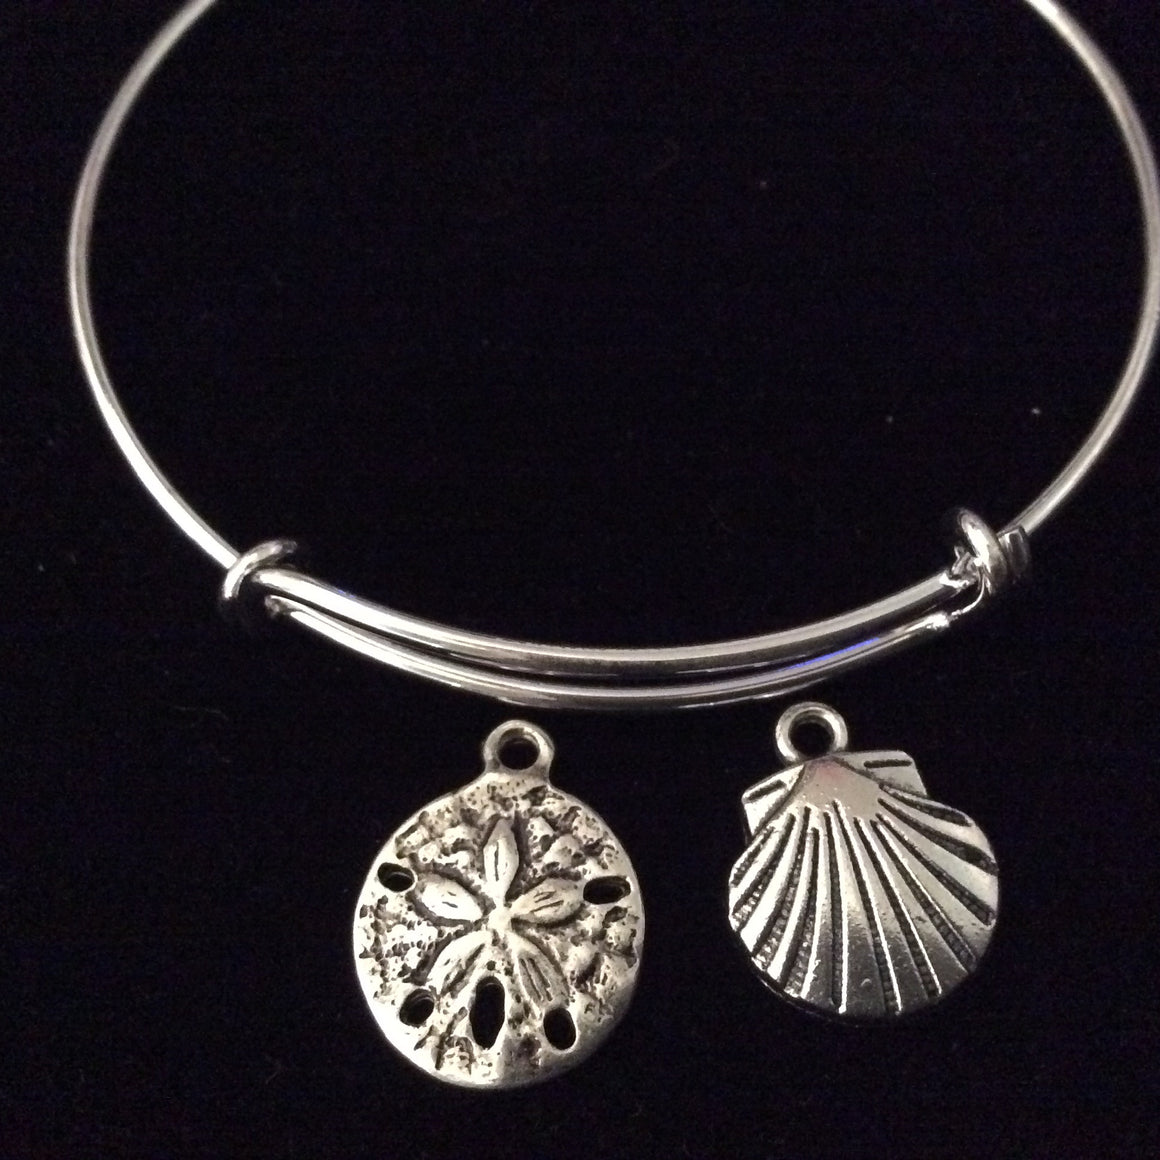 Sand Dollar with Sea Shell Silver Expandable Charm Bracelet Adjustable Wire Bangle Trendy Handmade Nautical Ocean